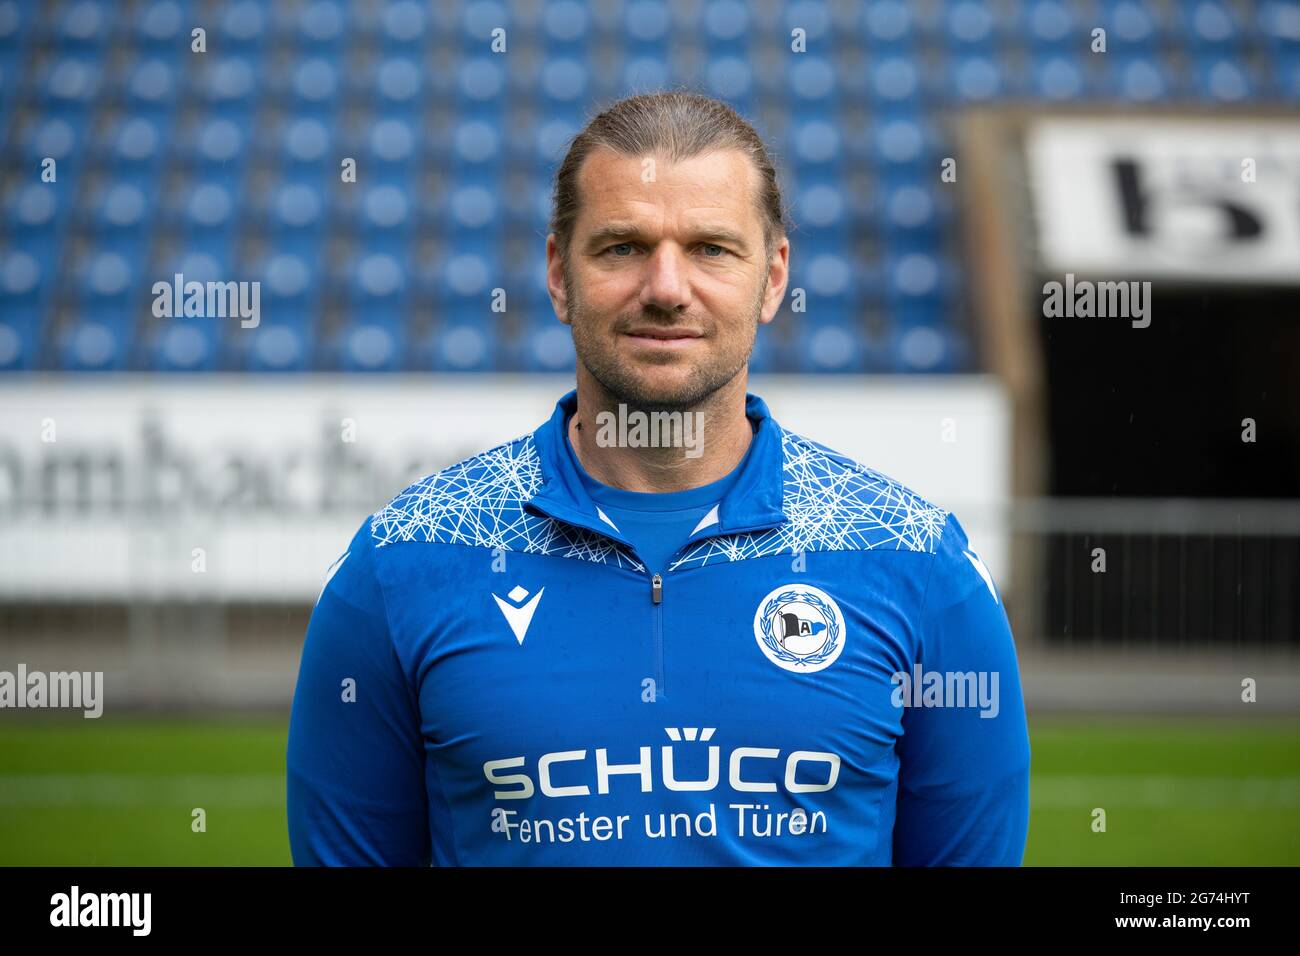 Bielefeld, Germany. 09th July, 2021. Football: Bundesliga, photo session  Arminia Bielefeld for the 2021/22 season at the Schüco Arena:  physiotherapist Michael Schweika. Credit: Friso Gentsch/dpa - only for use  in accordance with